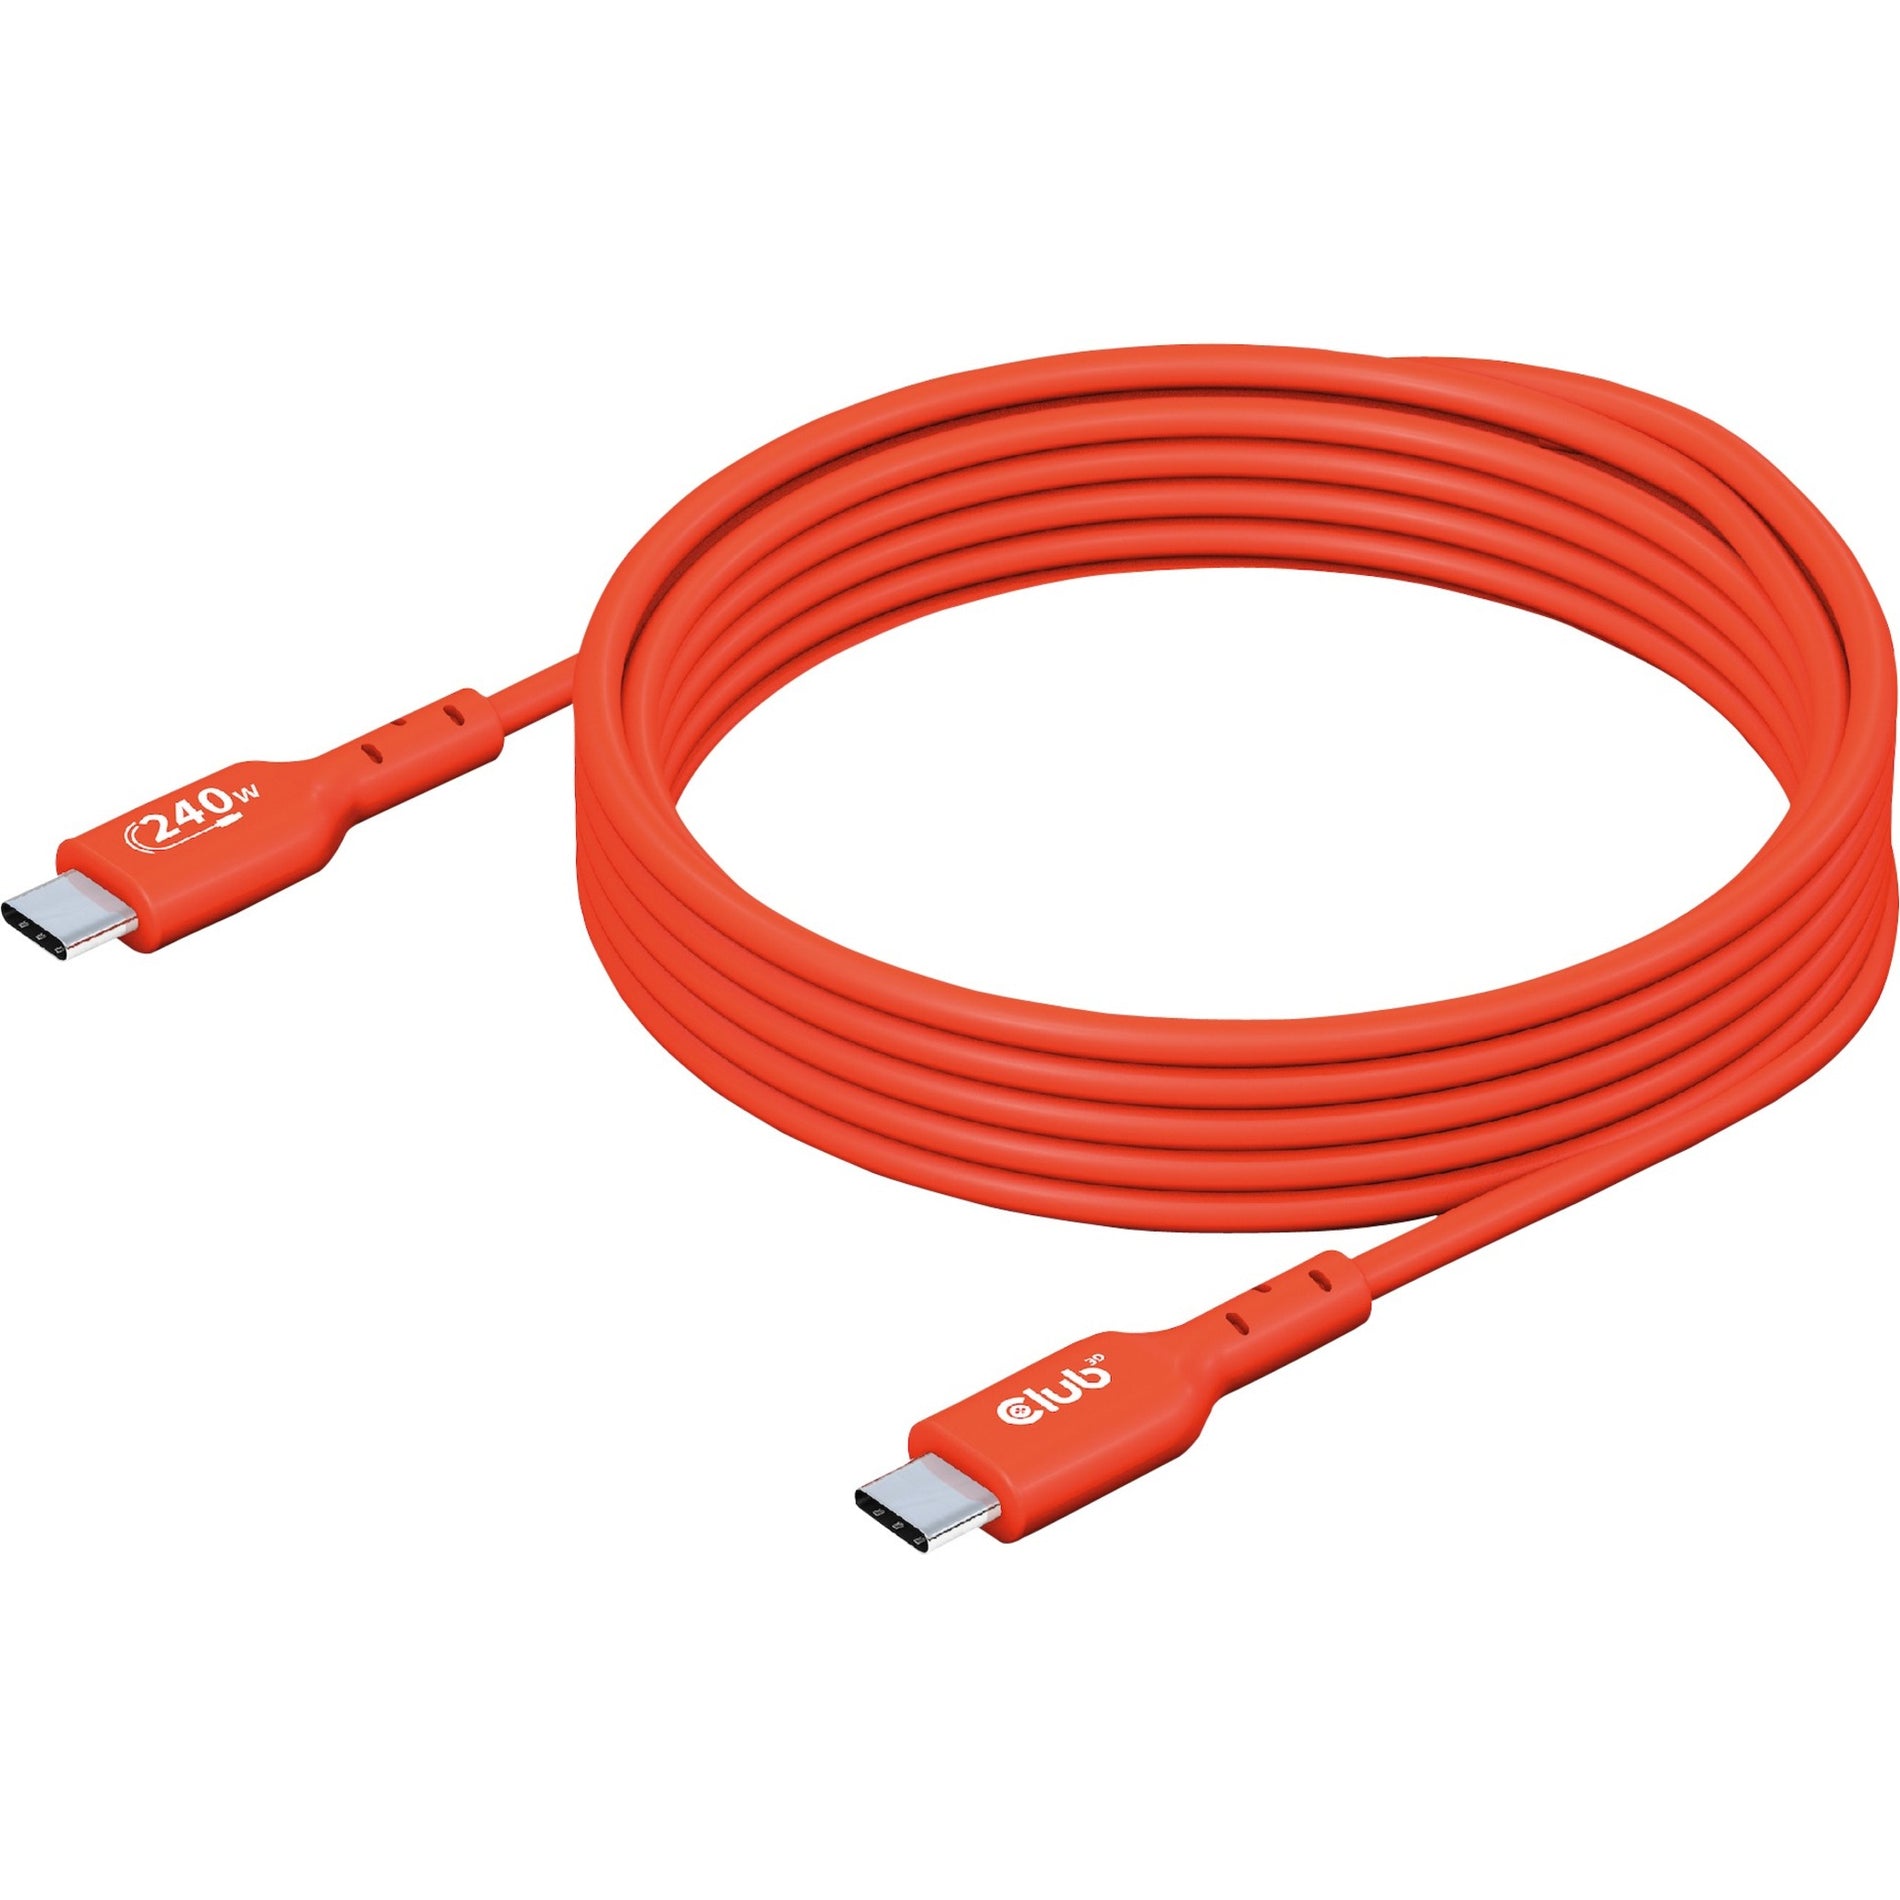 Club 3D CAC-1573 USB-C Data Transfer Cable, 6.56 ft, E-marker Chip, USB Power Delivery (USB PD), EMI Protection, Reversible